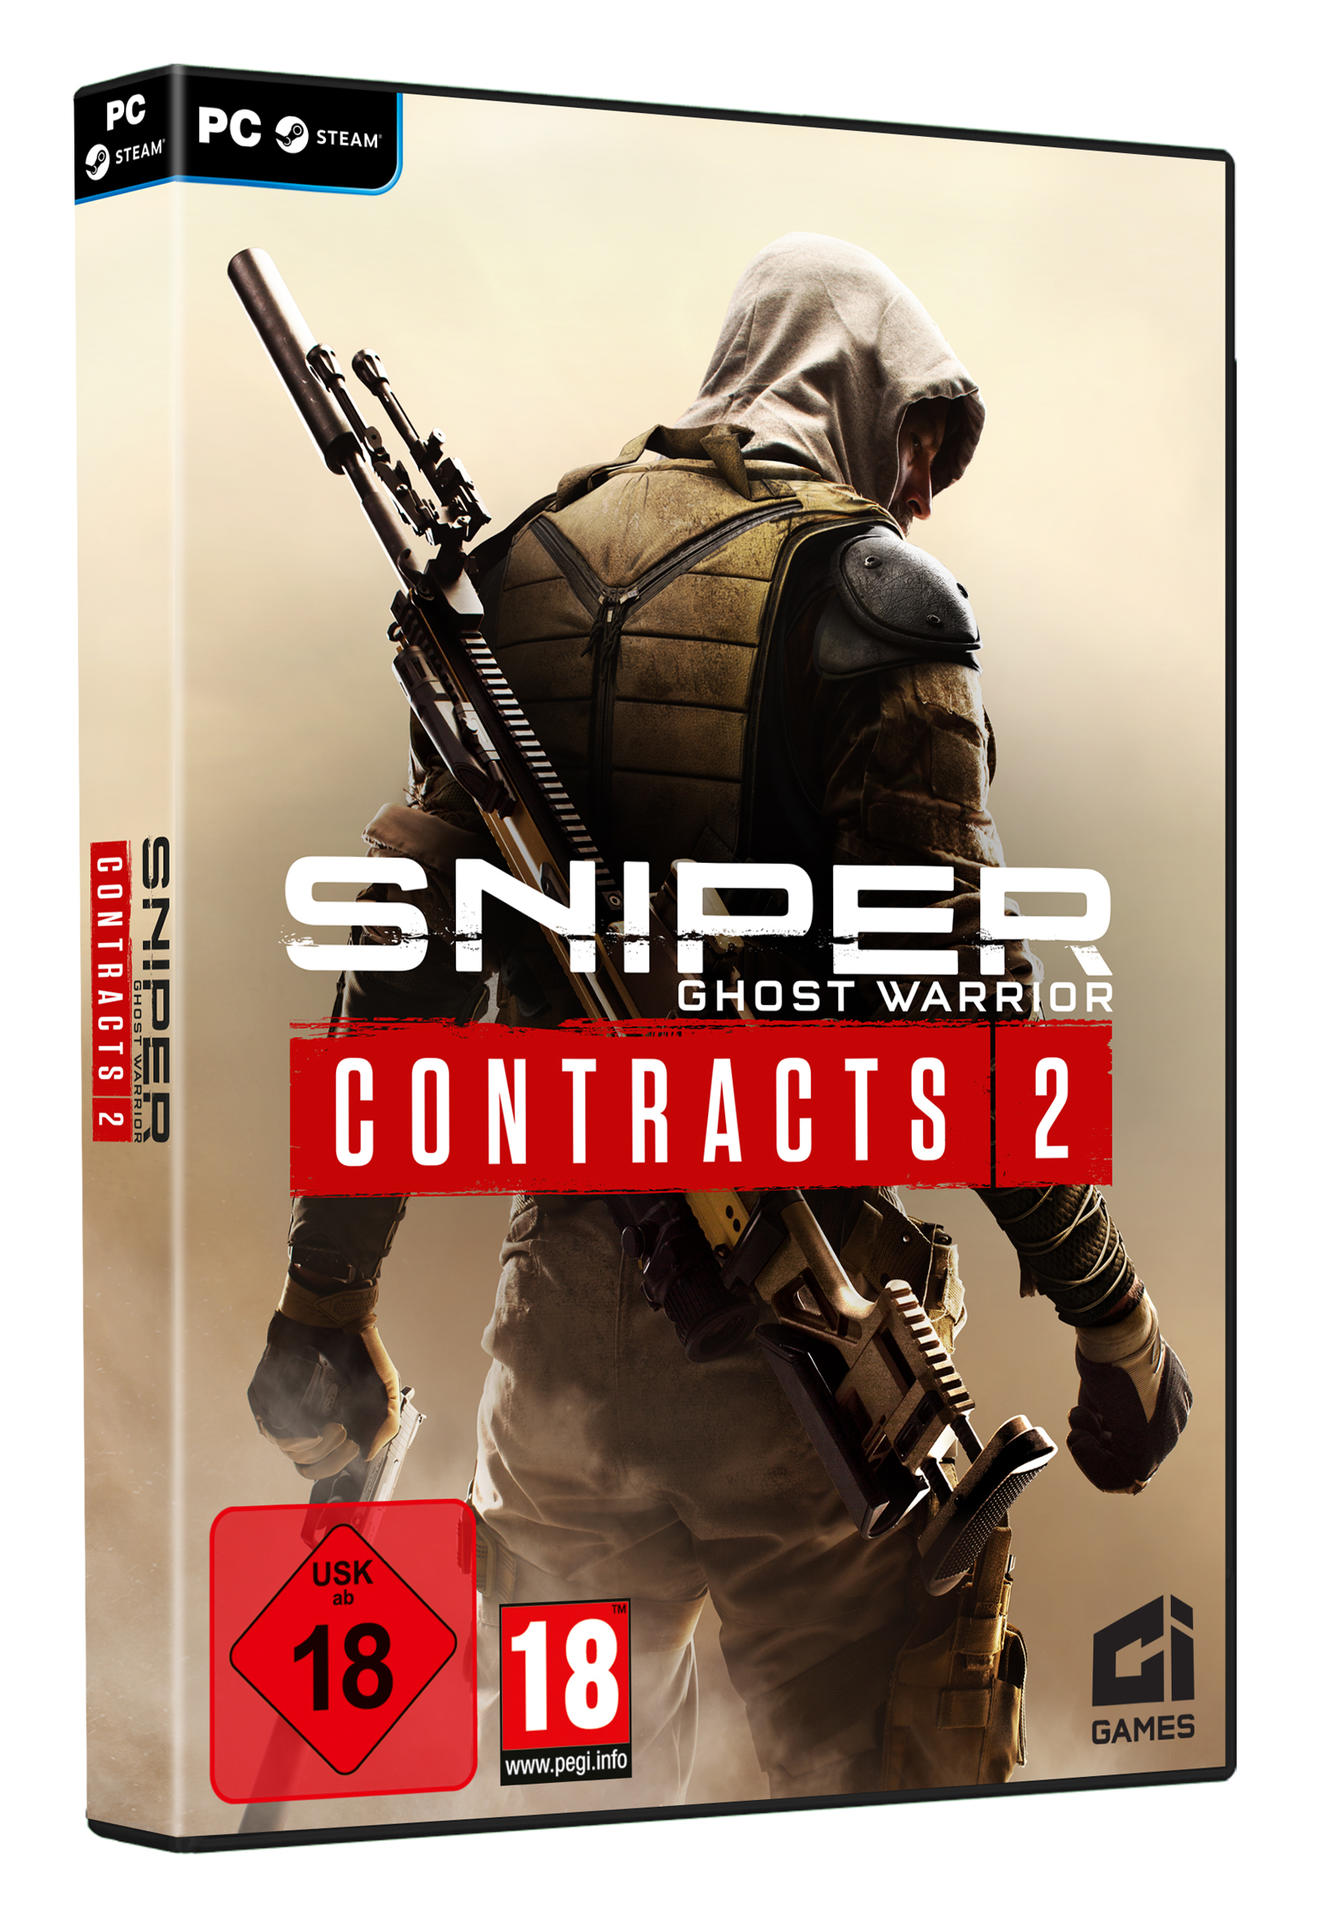 GHOST SNIPER WARRIOR [PC] - 2 CONTRACTS